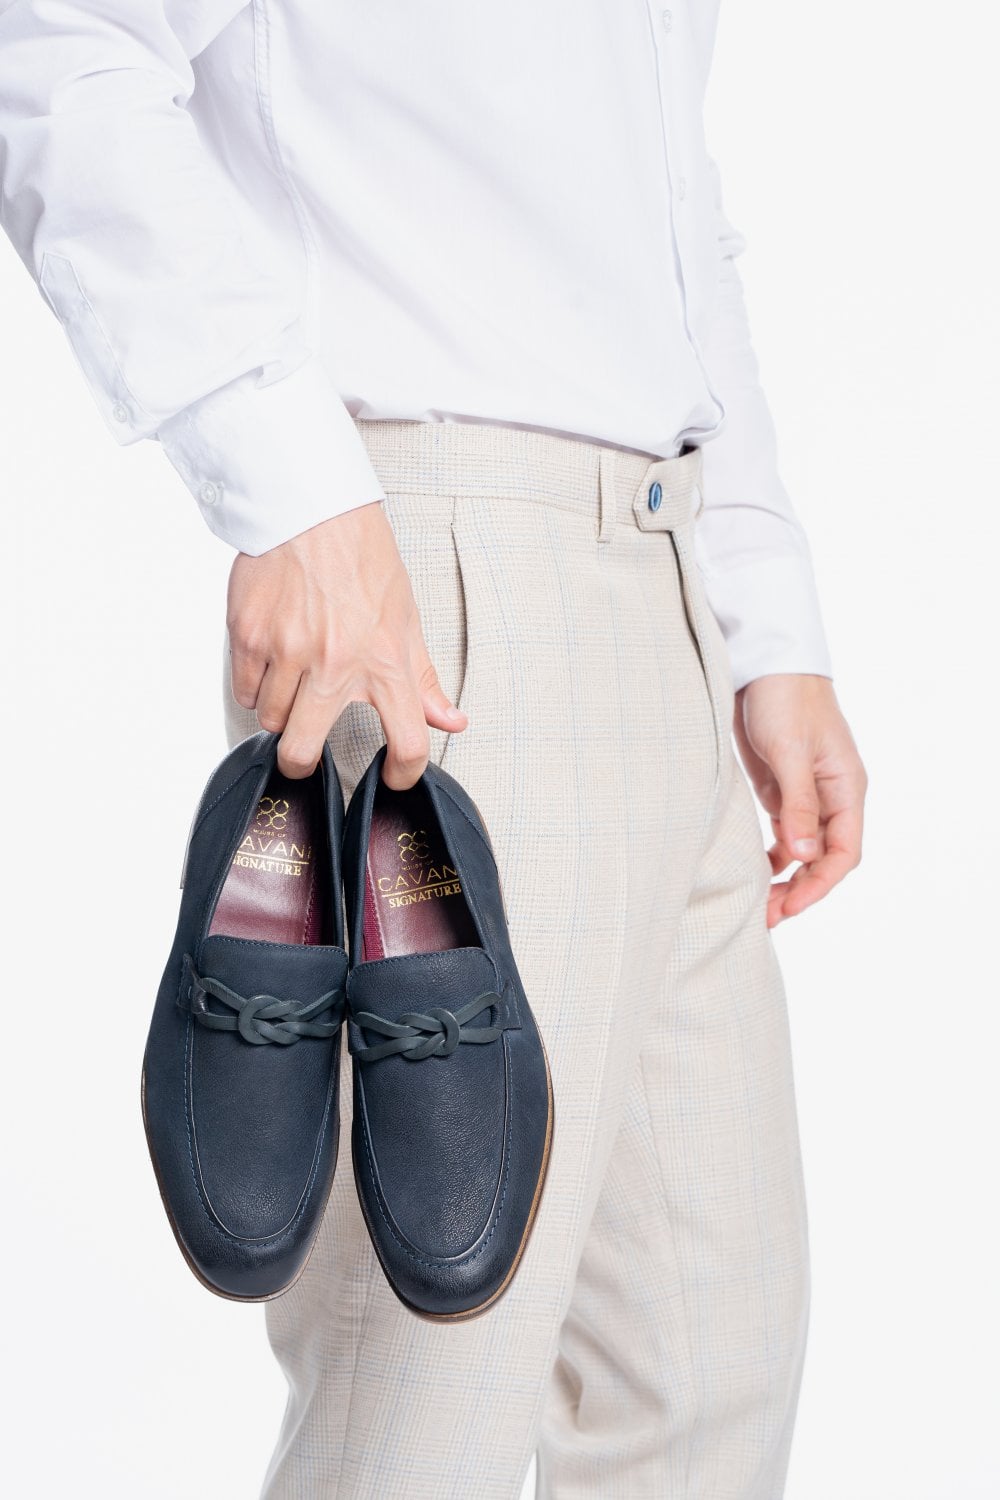 Arlington Navy Loafers - Shoes - - THREADPEPPER